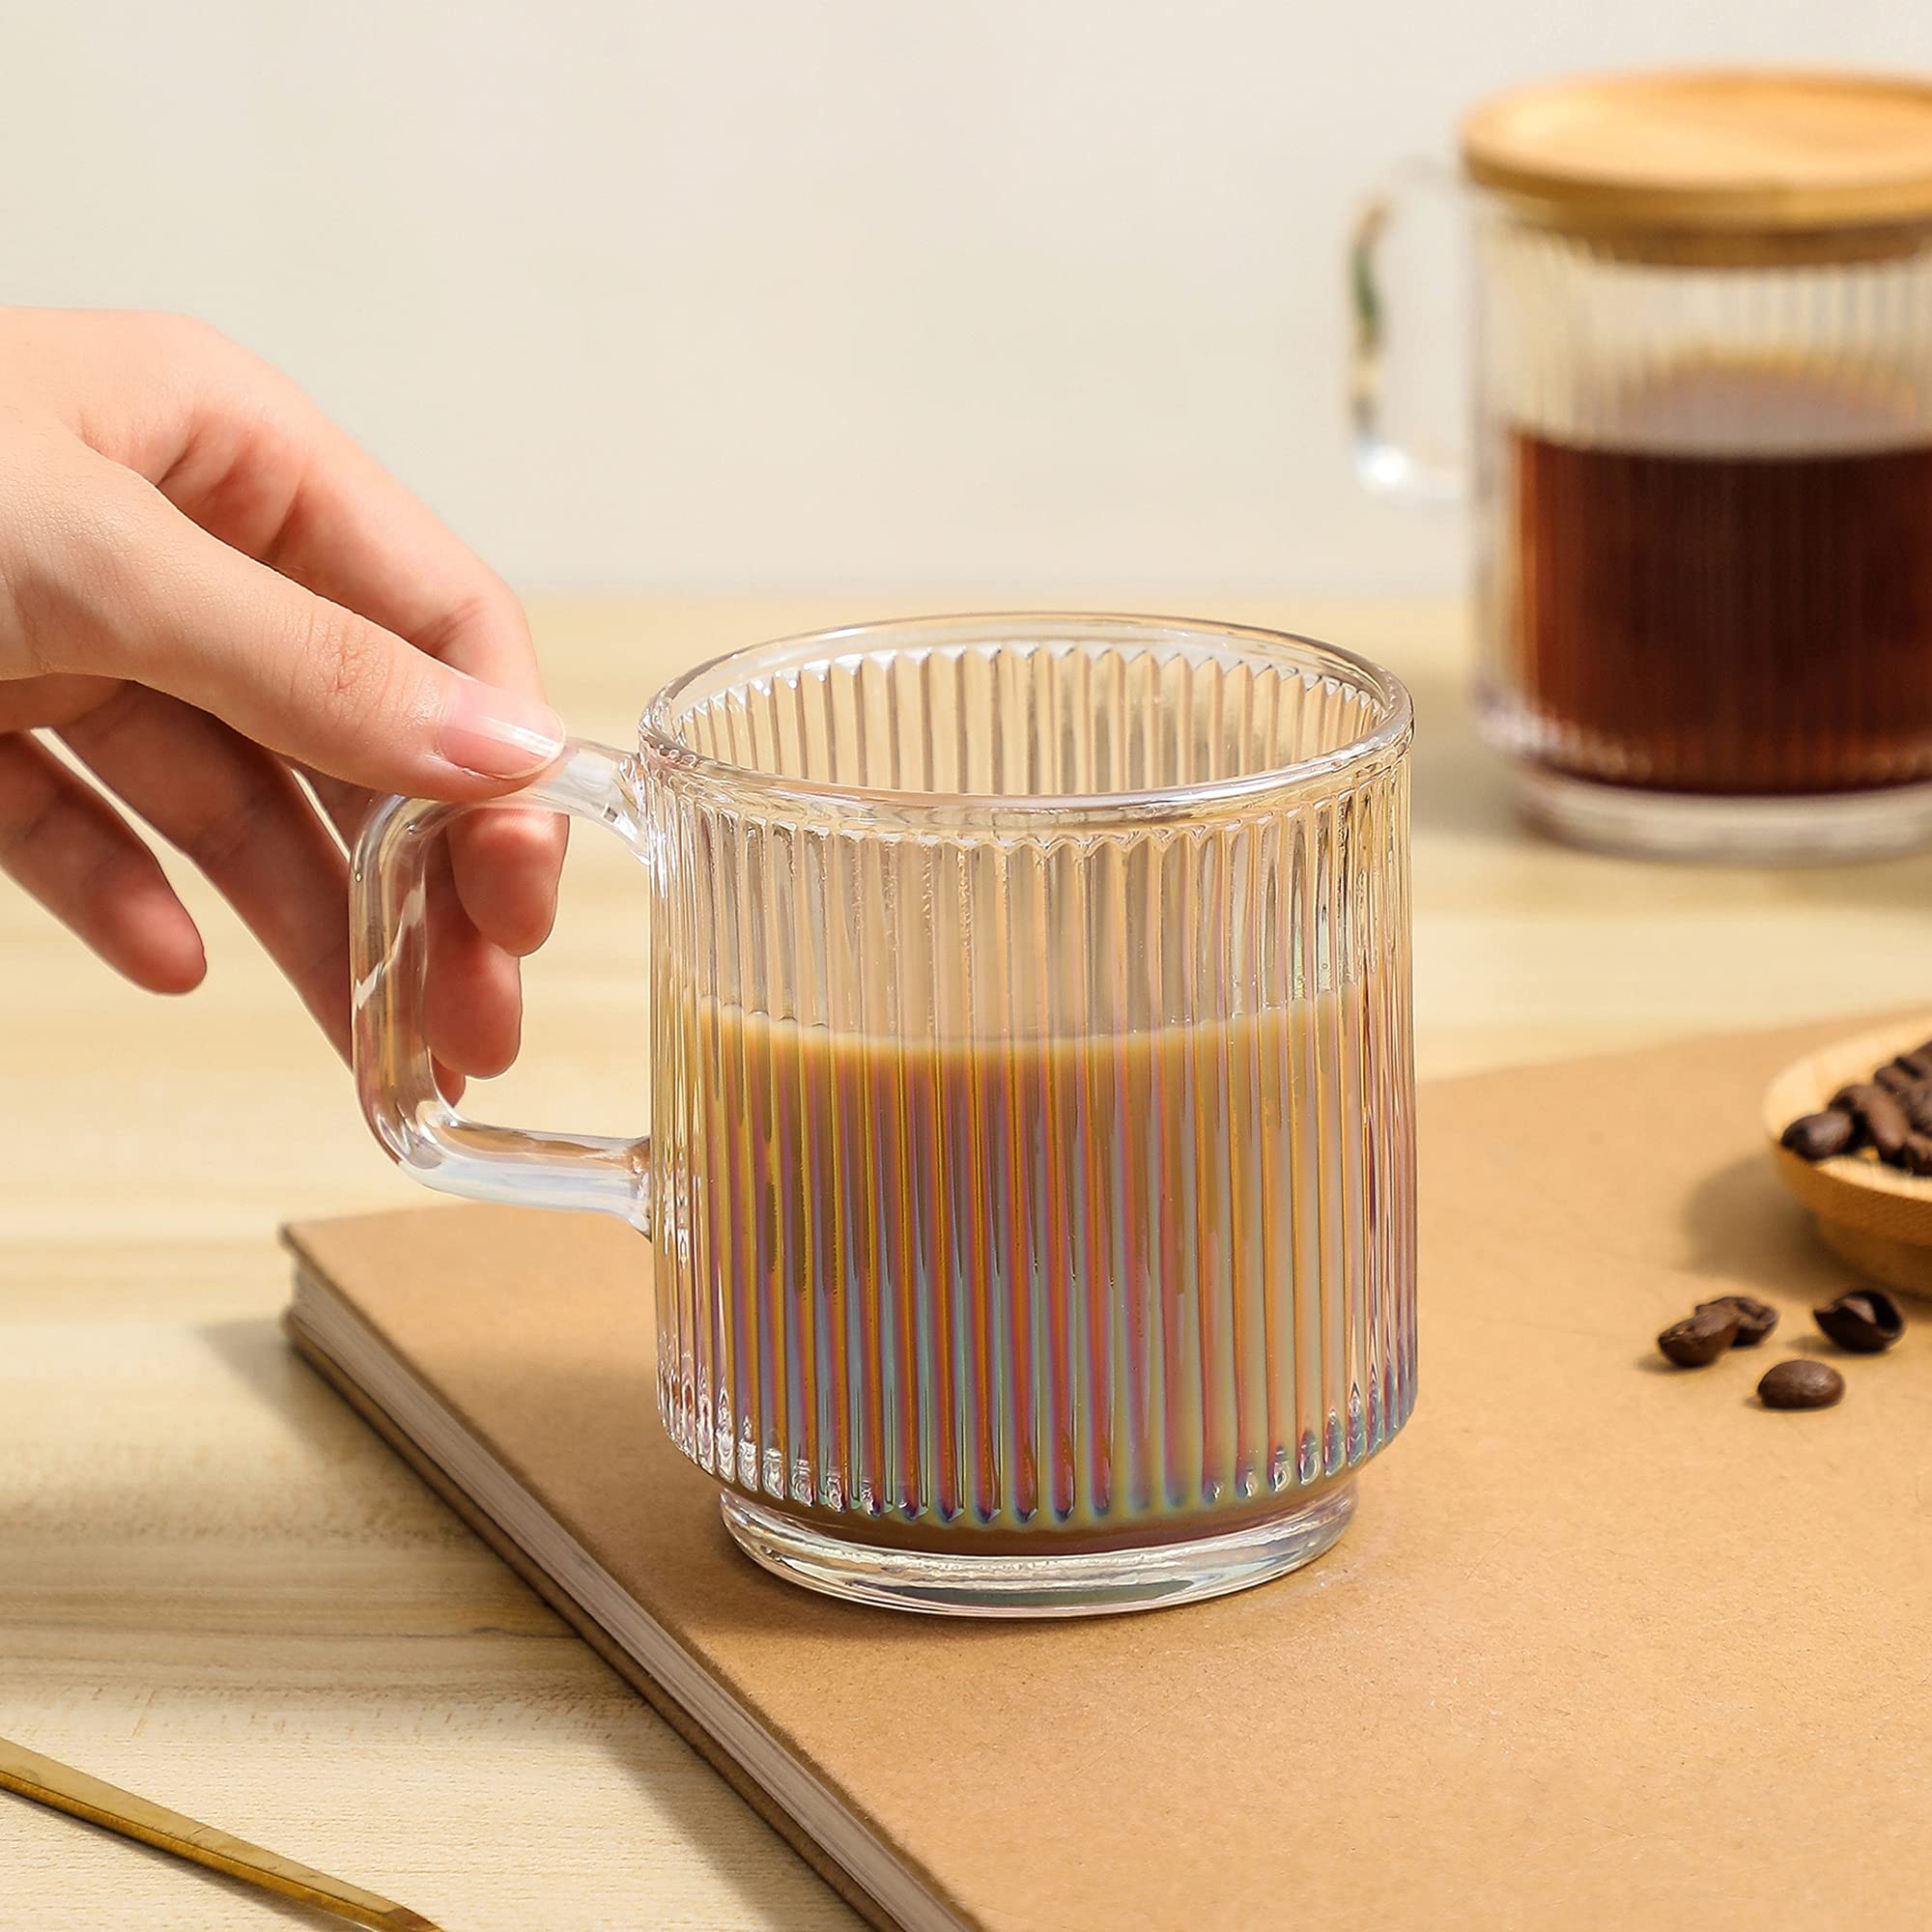 Lysenn Iridescent Glass Coffee Mug with Lid - Premium Classical Vertical Stripes Glass Tea Cup - for |Latte|Tea|Chocolate|Juice|Water| - Unleaded - Bamboo Lid - 12.5 Ounces